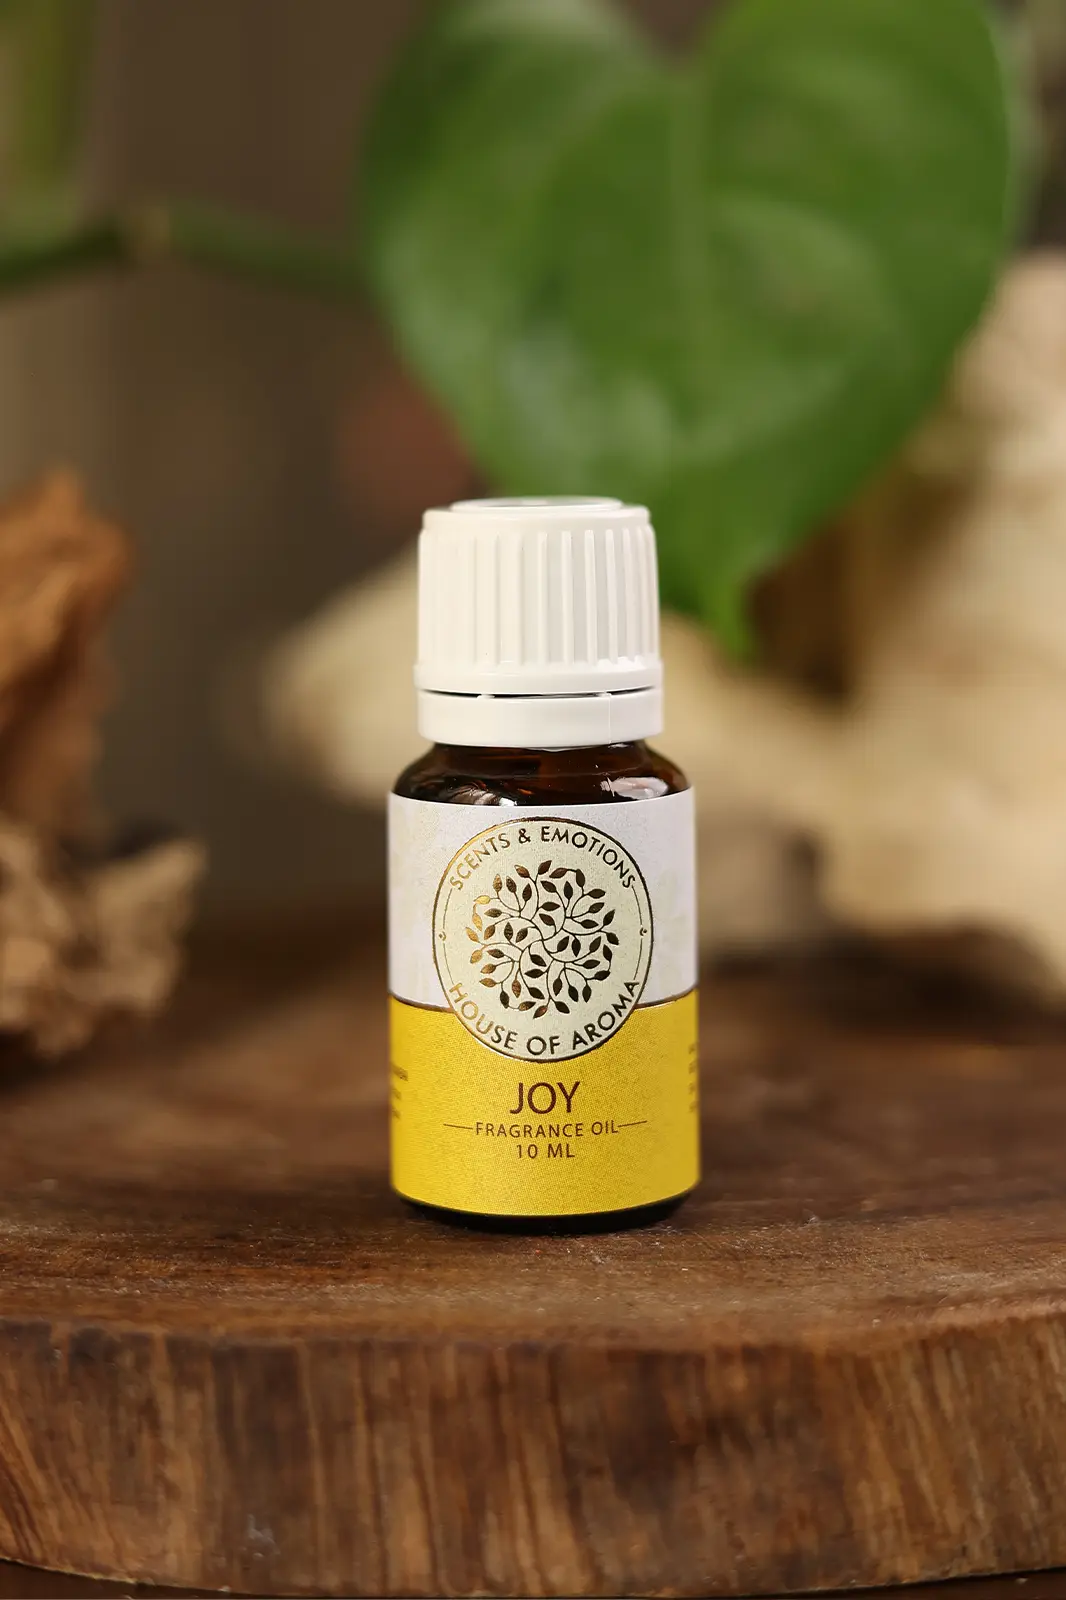 Fragrance Oil, Aroma oil, Synthetic oils, Fragrance oil for candles, oil for diffusers, Aromatic oil, Candle oil, Aromatherapy oil, oil manufacturers, House of Aroma, joy fragrance oil, happiness fragrance oil, joy fragrance, joy perfume oil, floral fragrance oil, floral scents, joy aroma oil, joy floral oil, joy aroma oil for stress relief